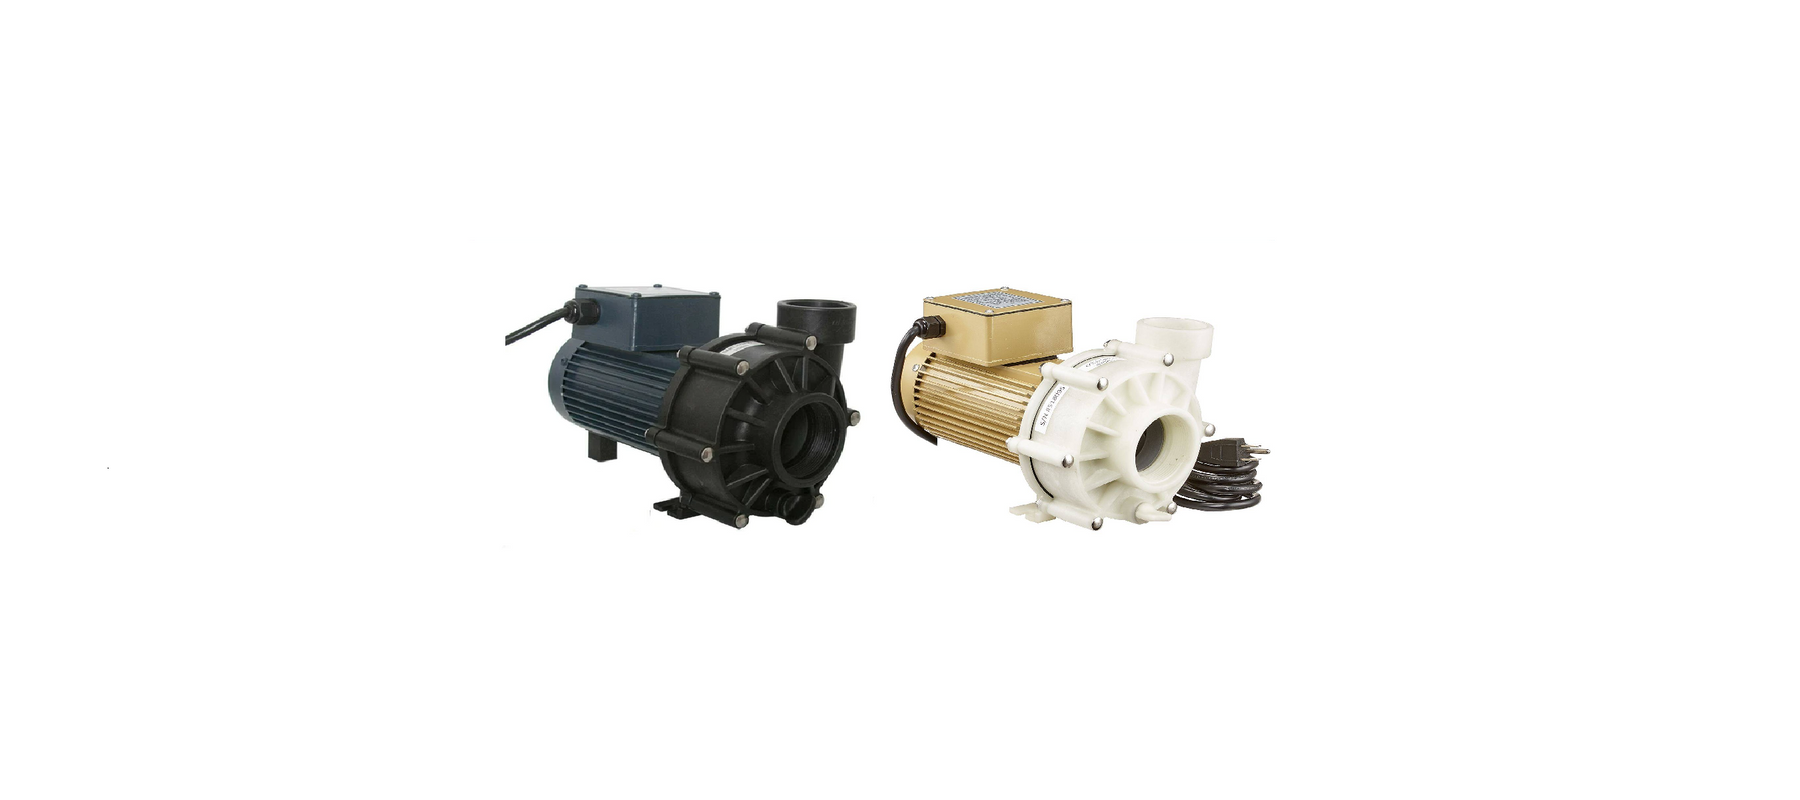 The Differences between the Reeflo Silver Dart Snapper Pump and the Gold Super Dart Snapper Pump